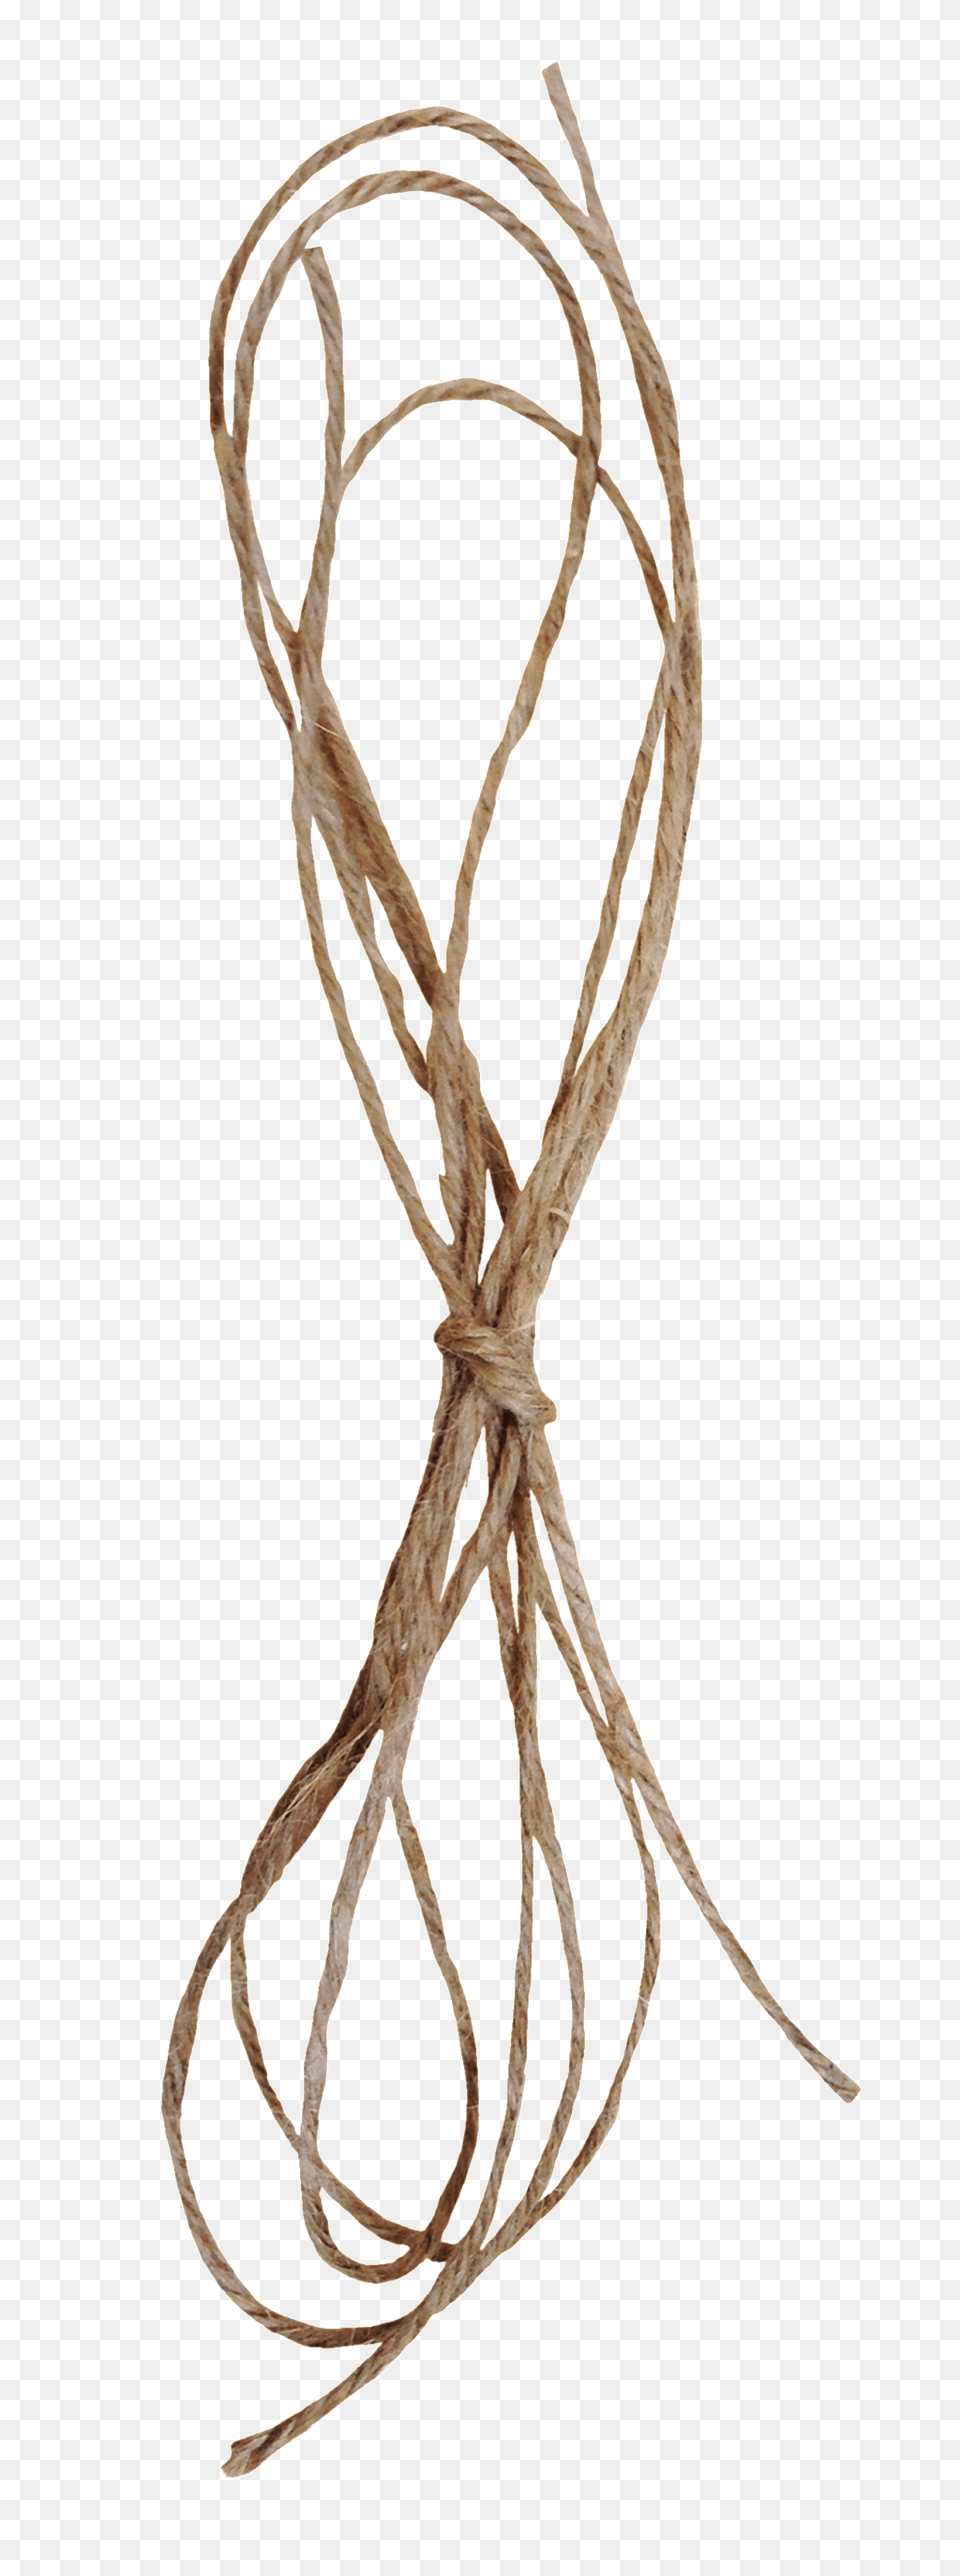 Wood Grain Horns Transparent Decorative Rope, Knot Free Png Download